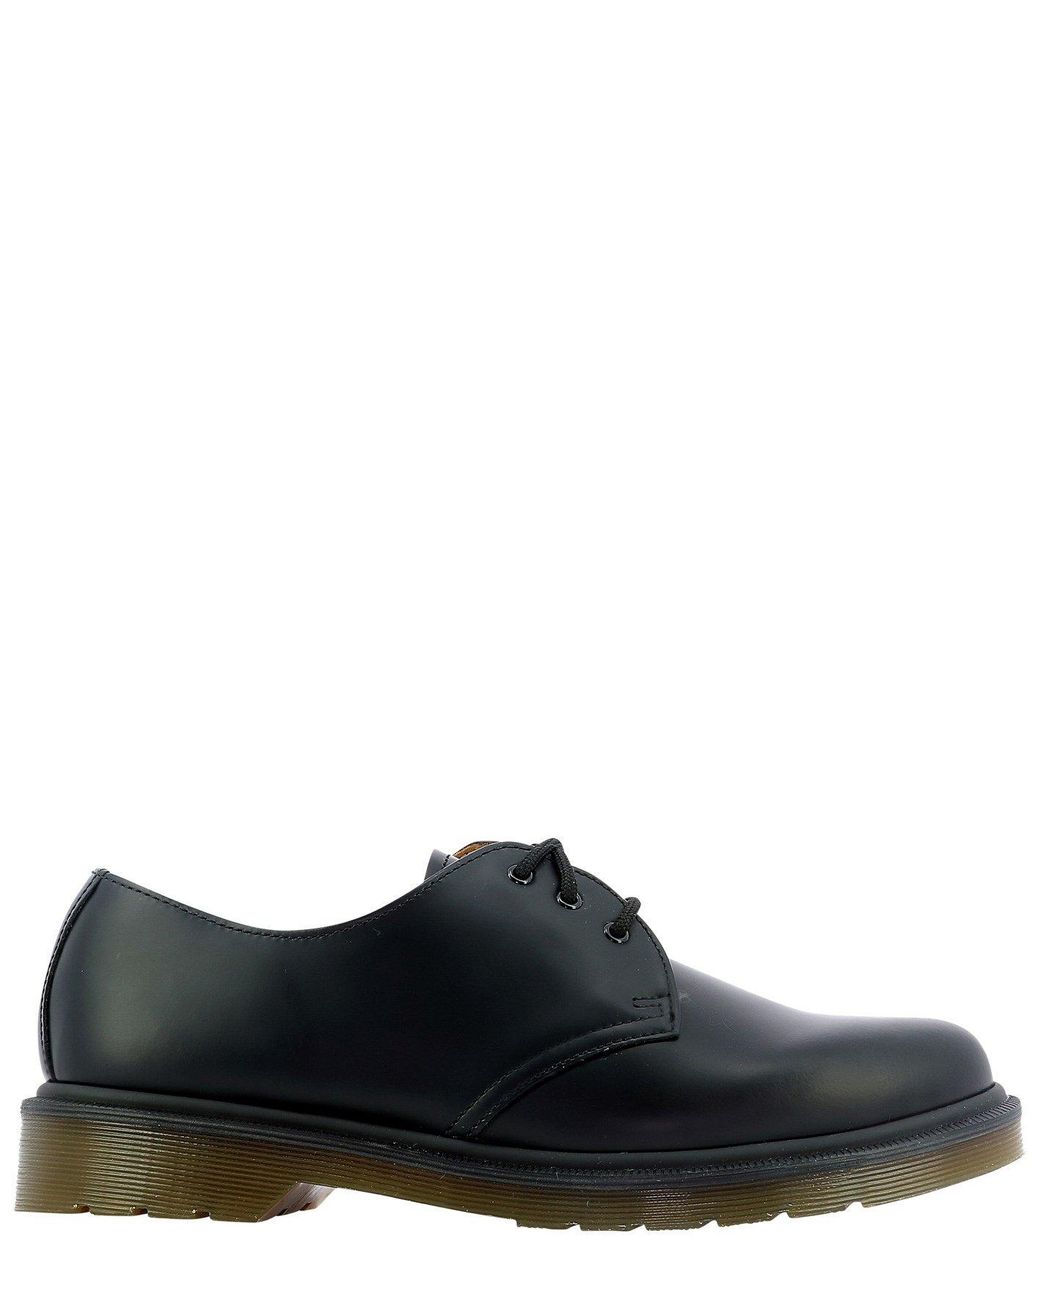 Dr. Martens Leather 1461 Lace-up Shoes in Black for Men - Lyst